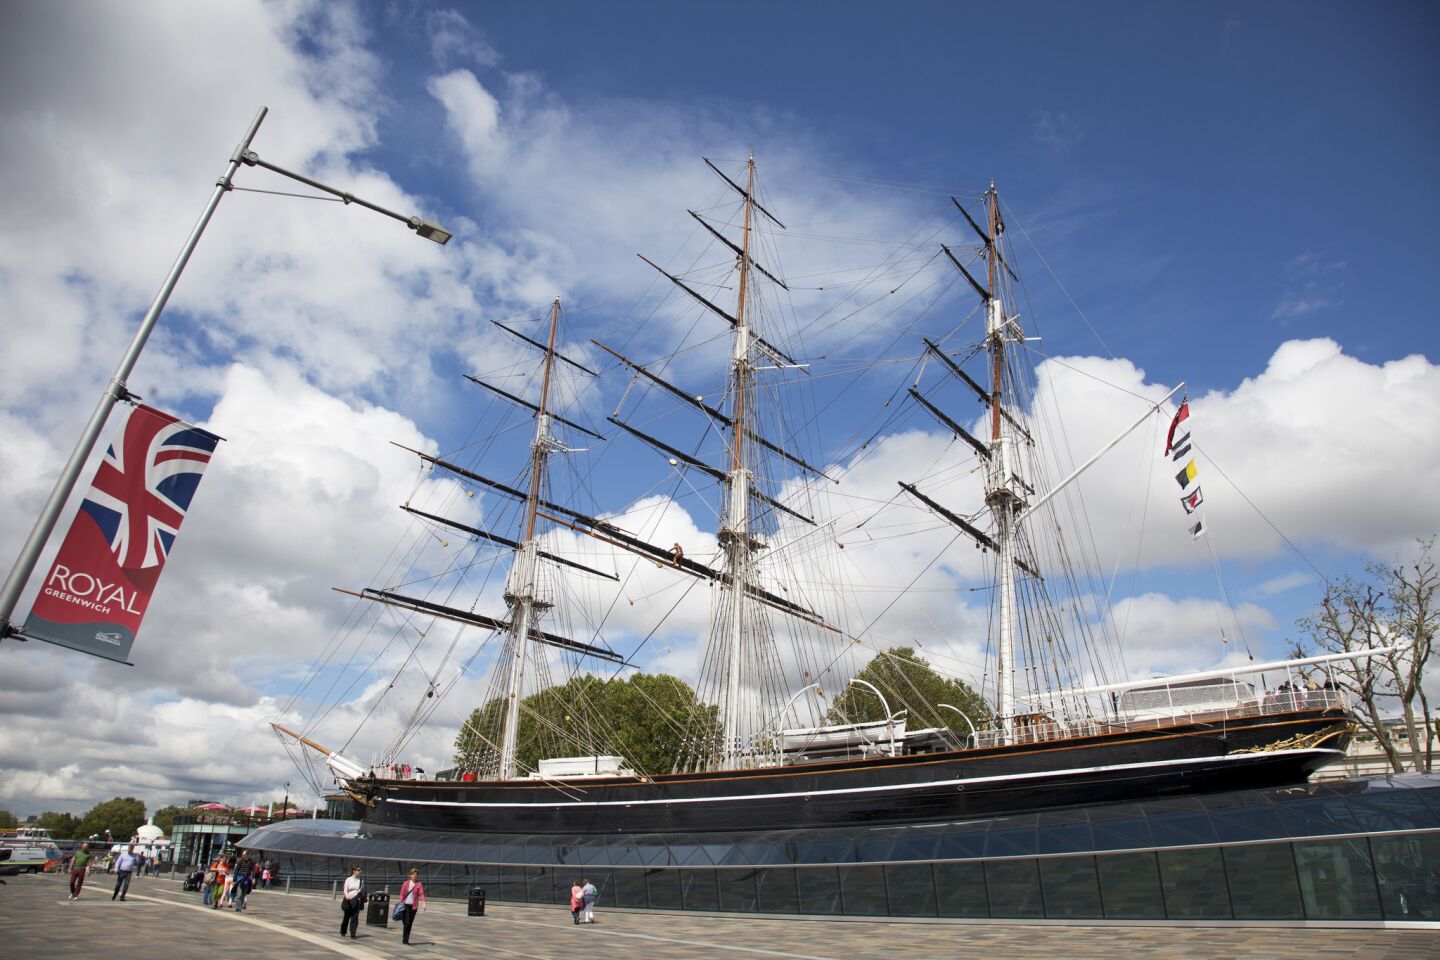 The Cutty Sark is a clipper ship built in 1869 for the Jock Willis shipping line. The ship now sits in Greenwich.